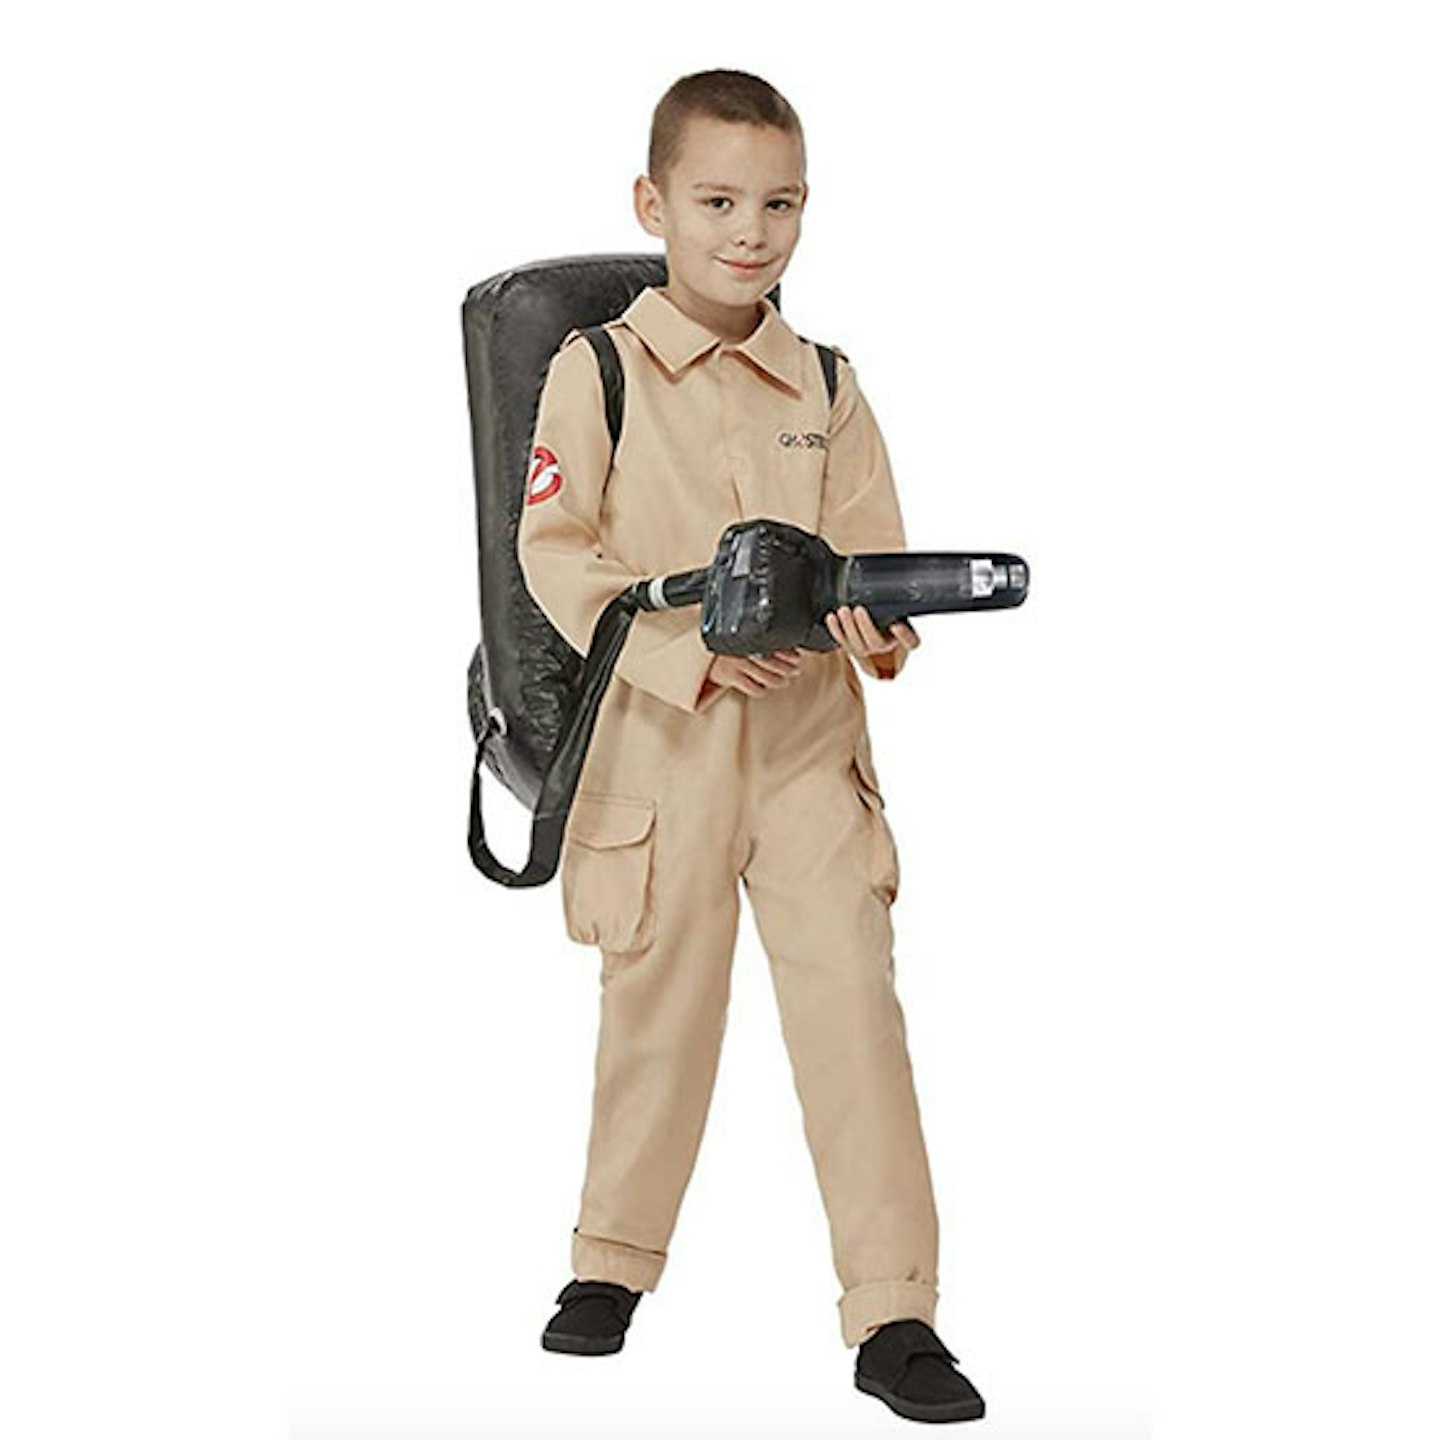 Smiffys Officially Licensed Ghostbusters Child's Costume